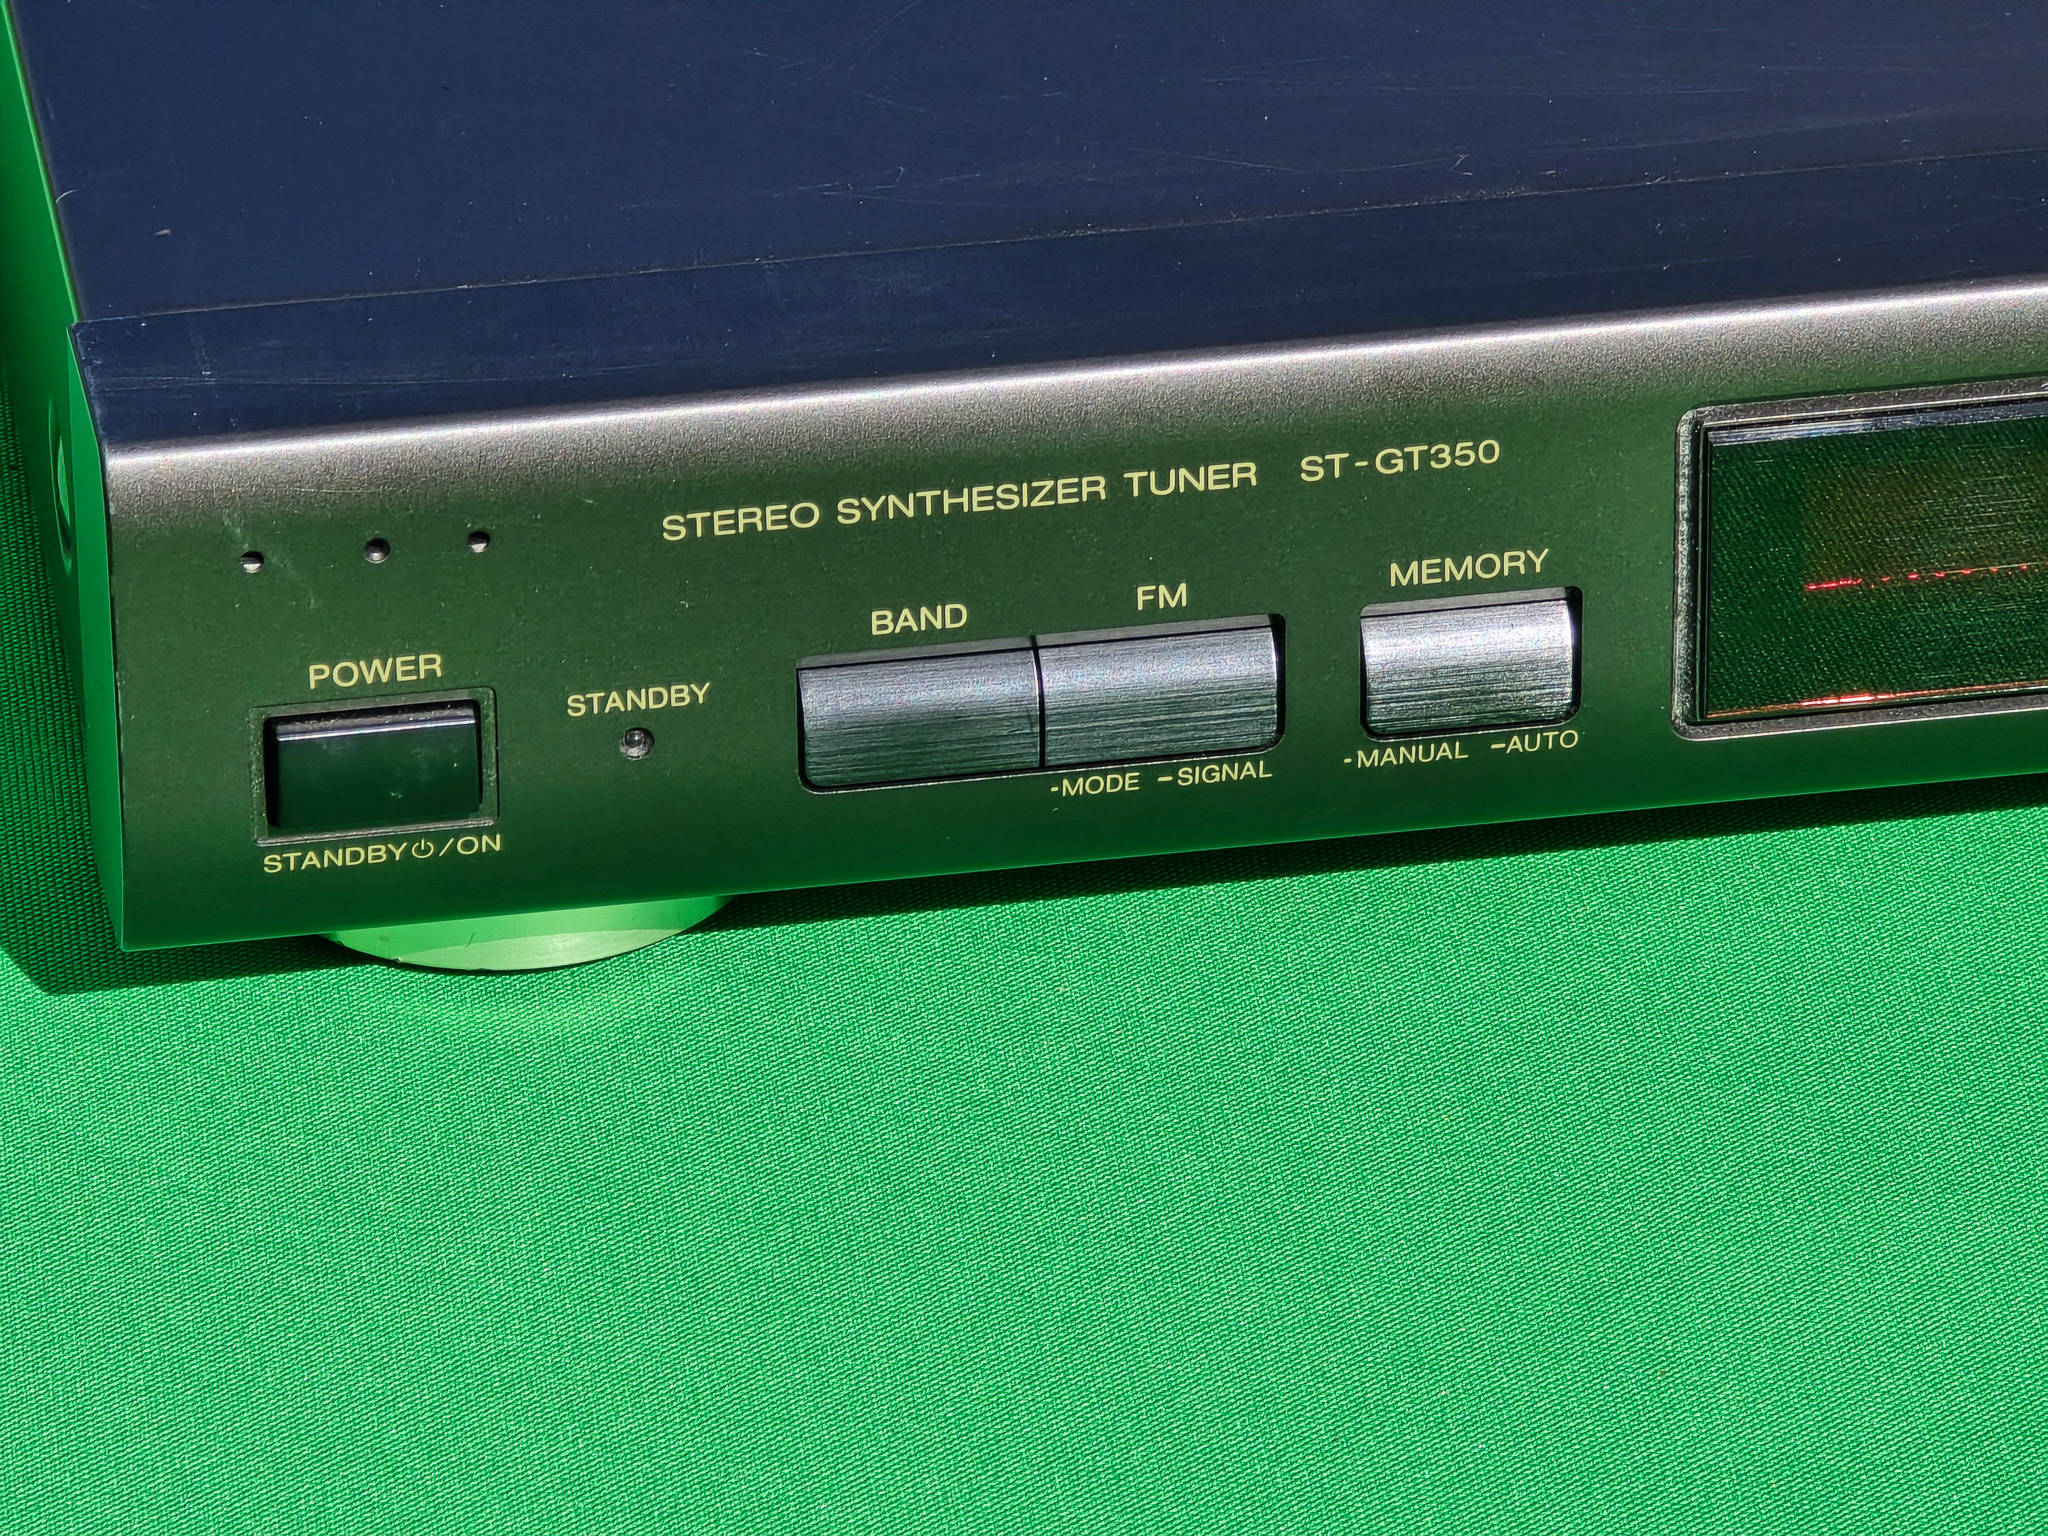 Technics Stereo Synthesizer Tuner ST-GT350 - Image 2 of 4